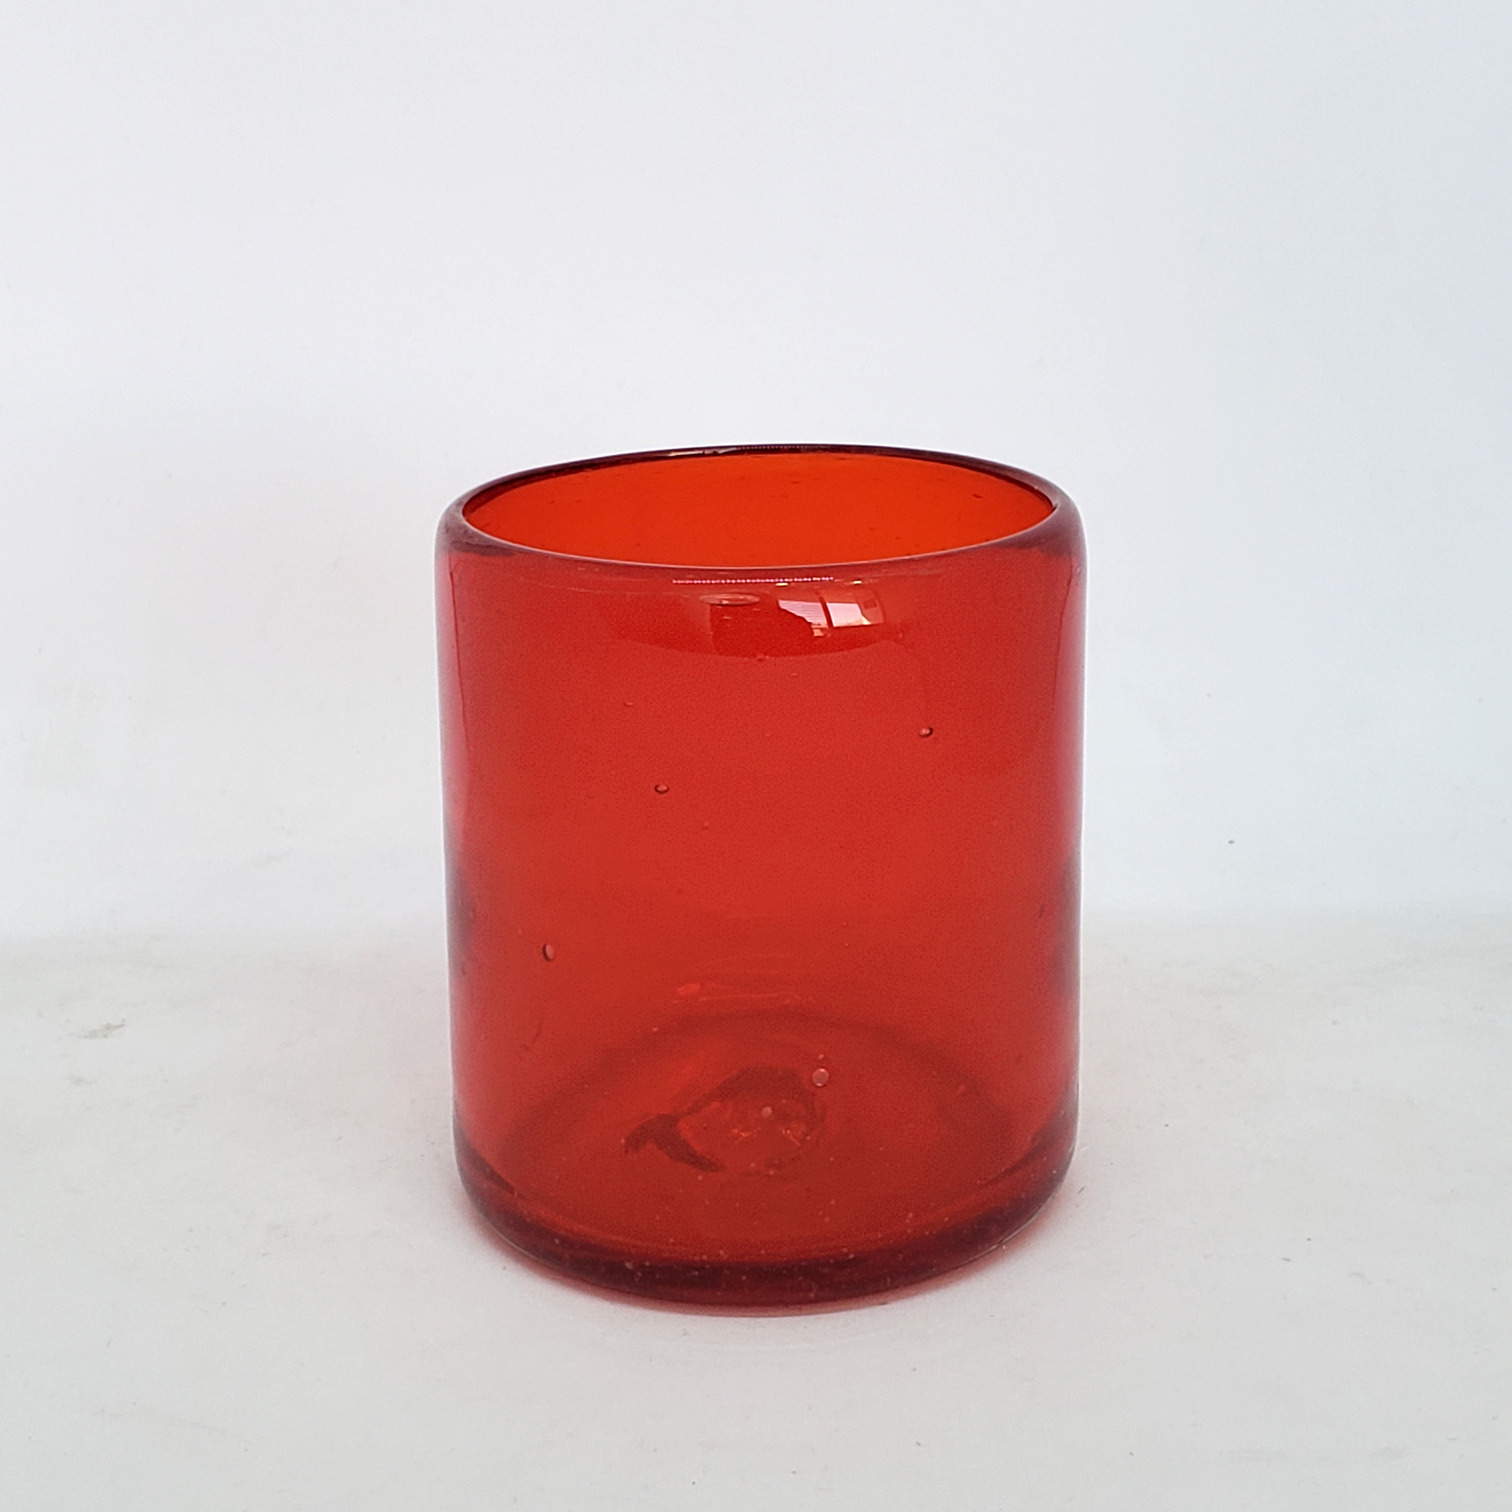 Mexican Glasses / Solid Ruby Red 9 oz Short Tumblers (set of 6) / Enhance your favorite drink with these colorful handcrafted glasses.